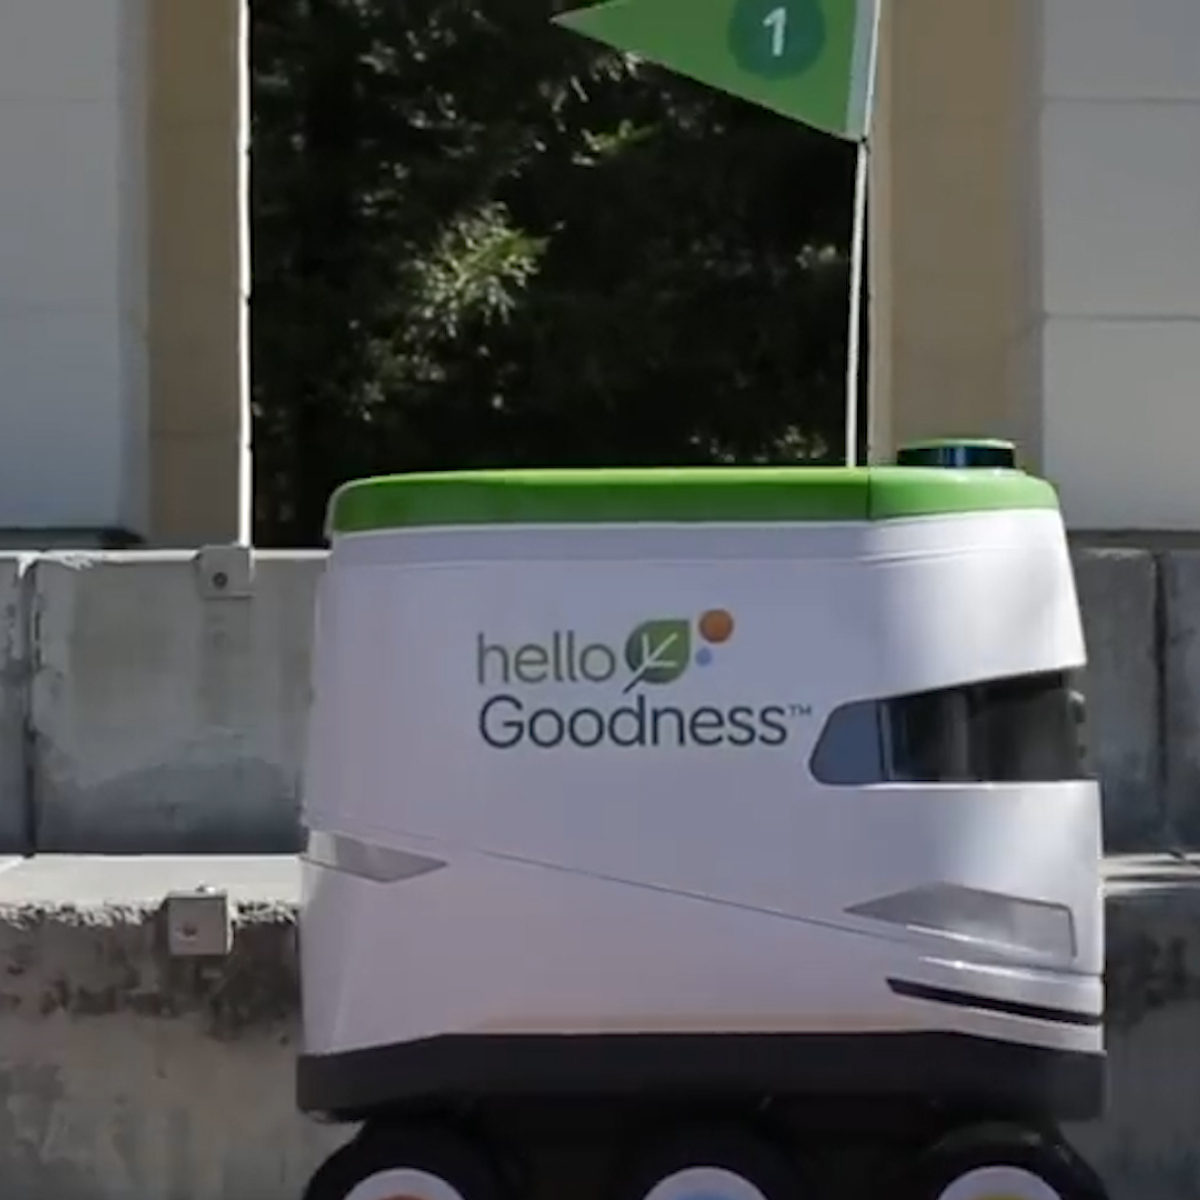 PepsiCo is using robots to deliver snacks to college students | Mashable